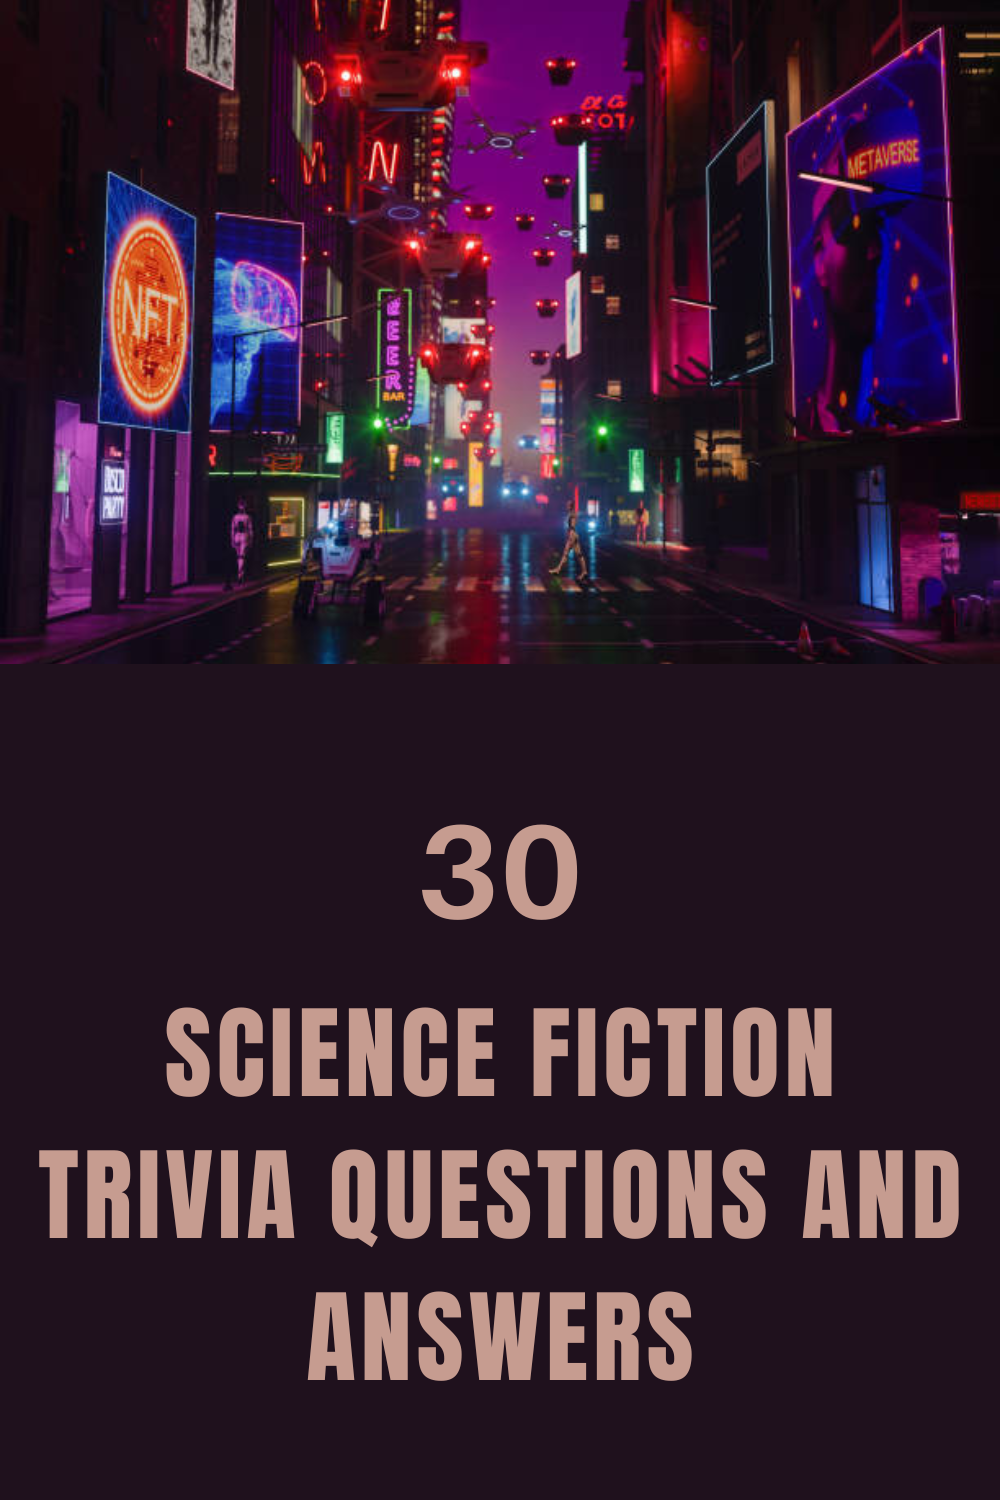 30 Science Fiction Trivia Questions and Answers